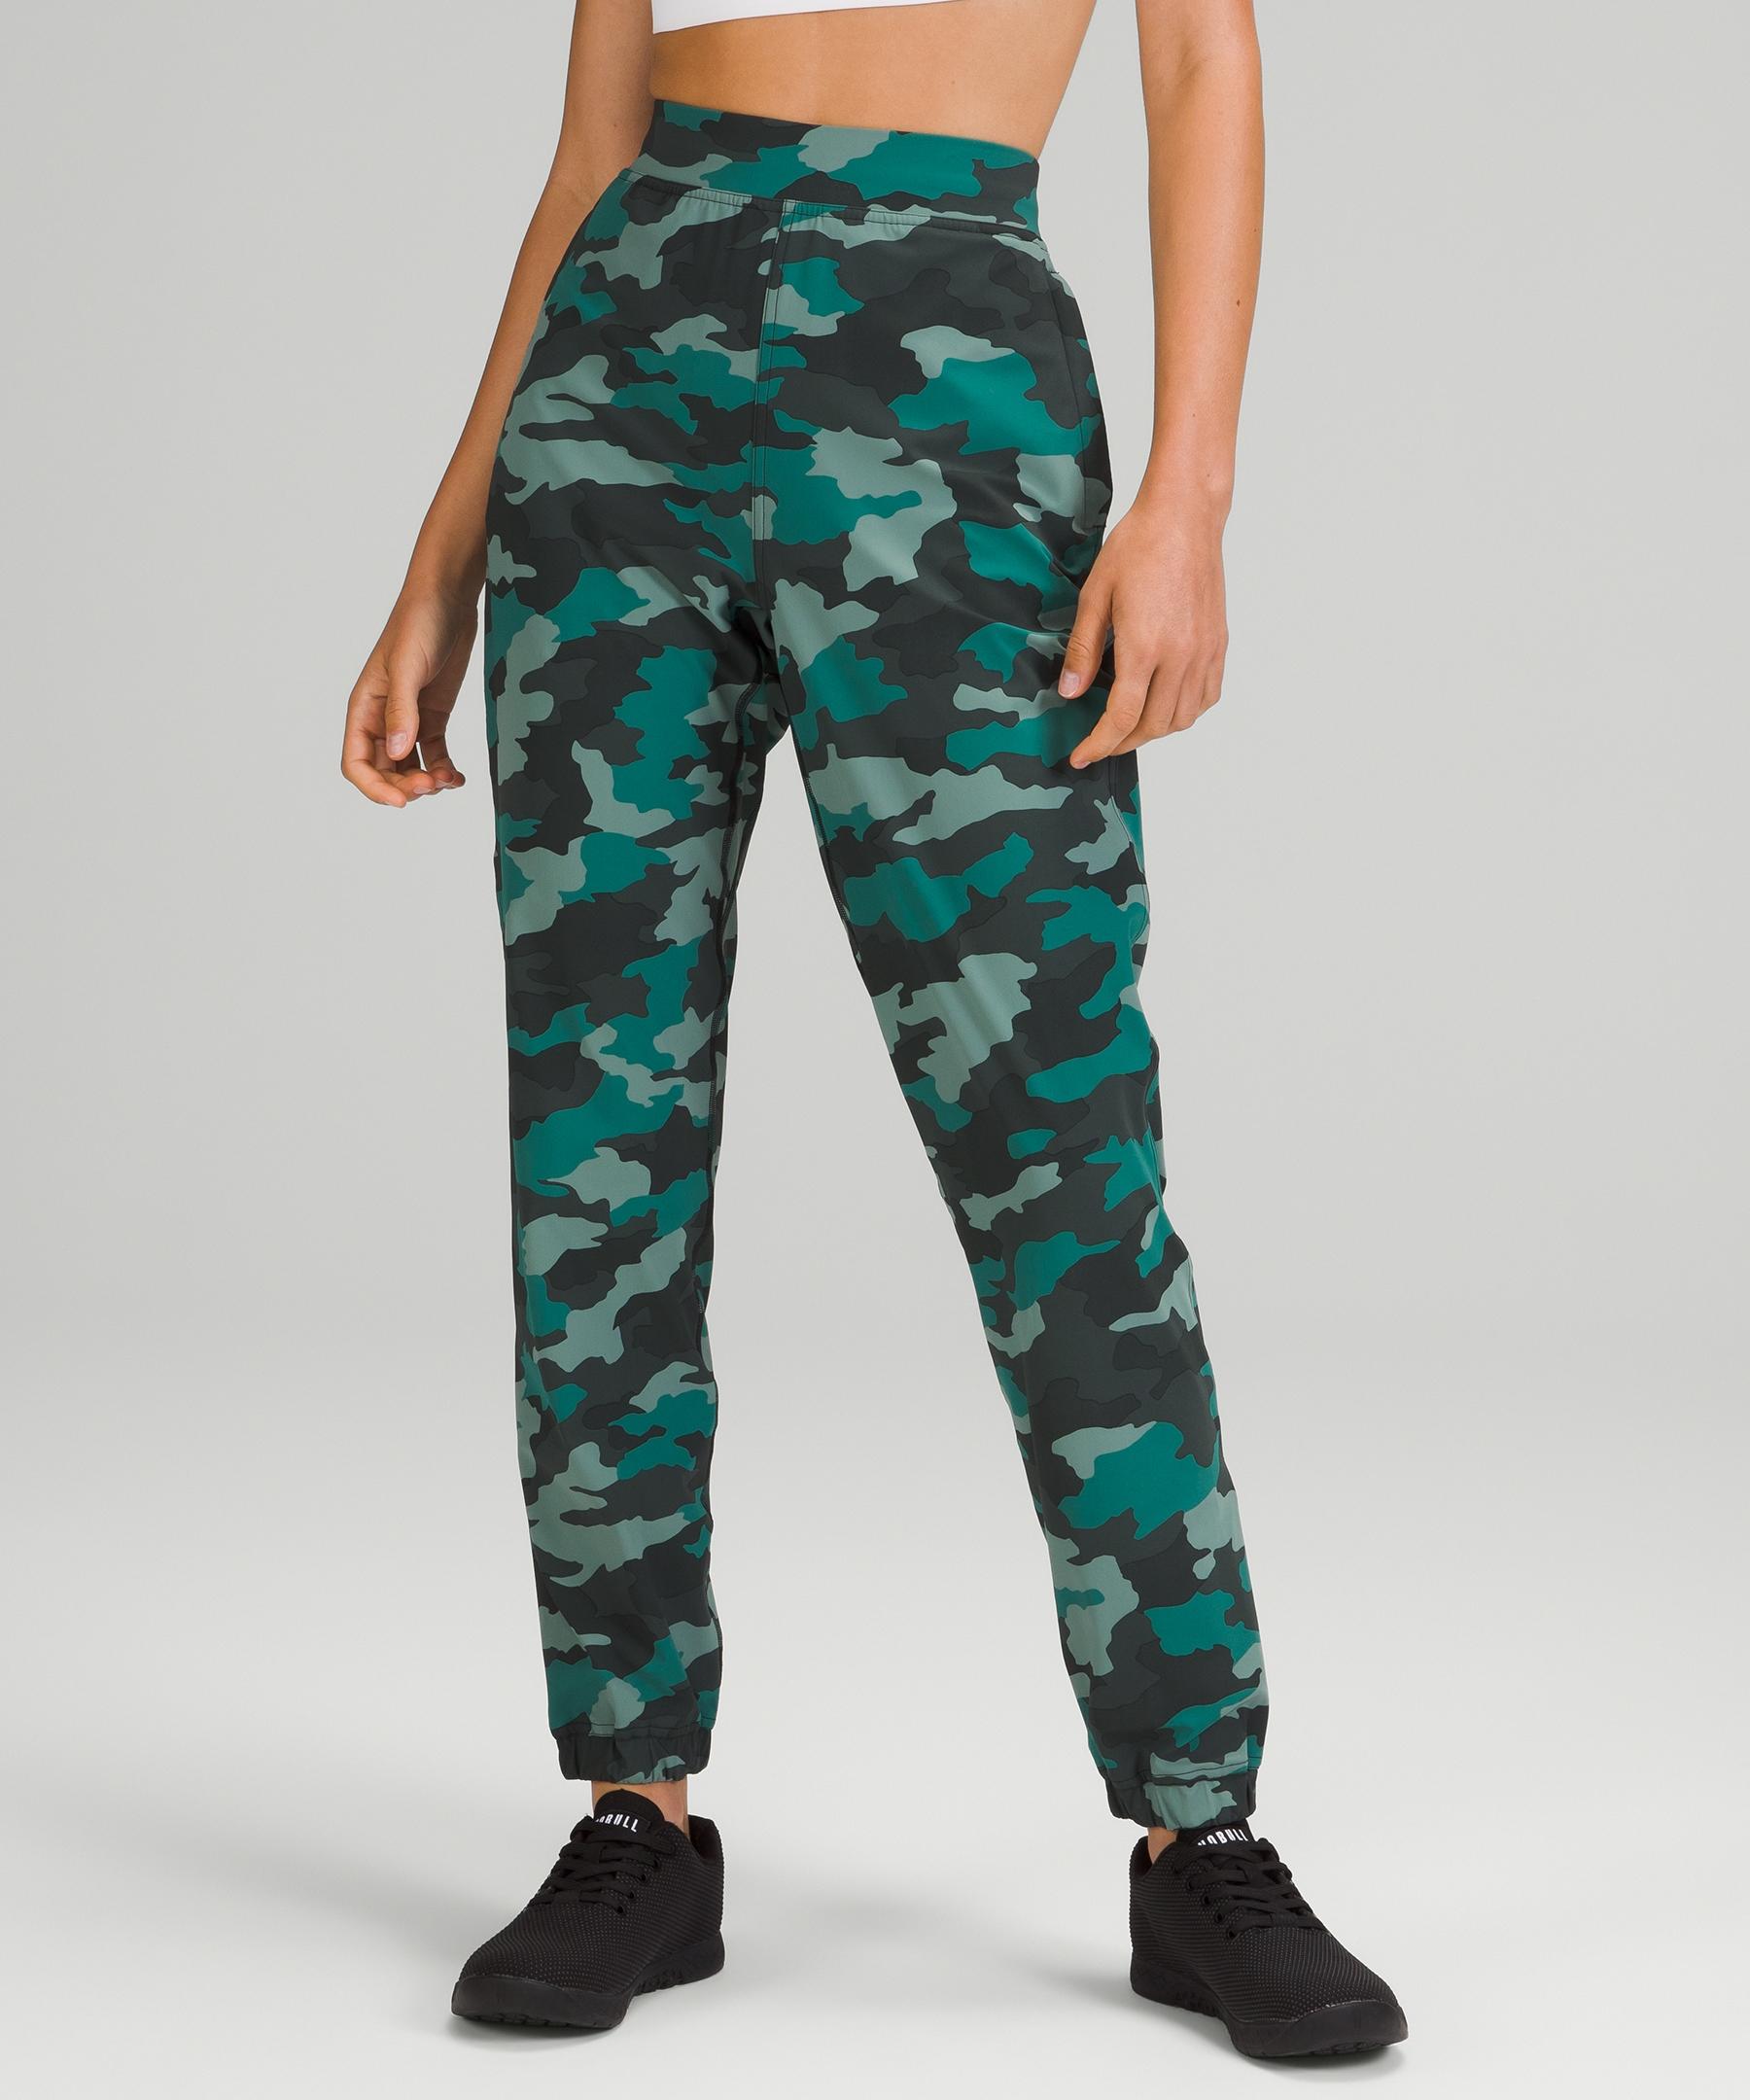 Joggers For Women  Buy Joggers For Women online at Best Prices in India   Flipkartcom